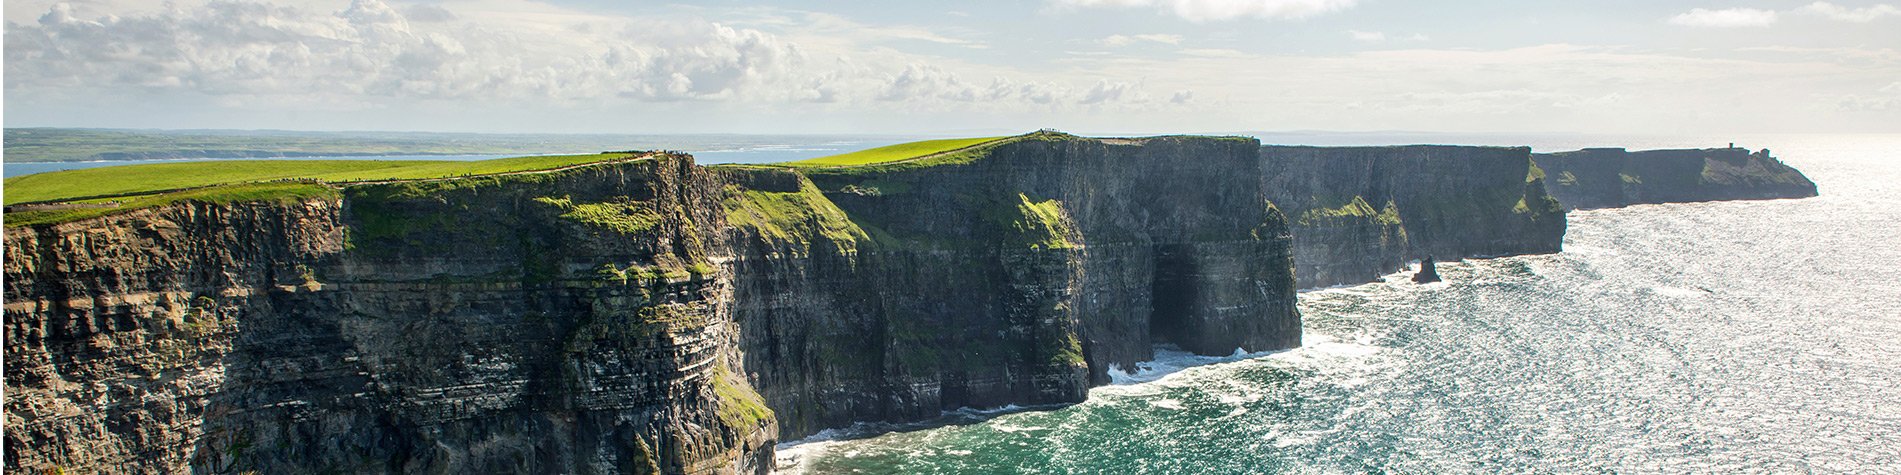 The Stunning Cliffs of Moher